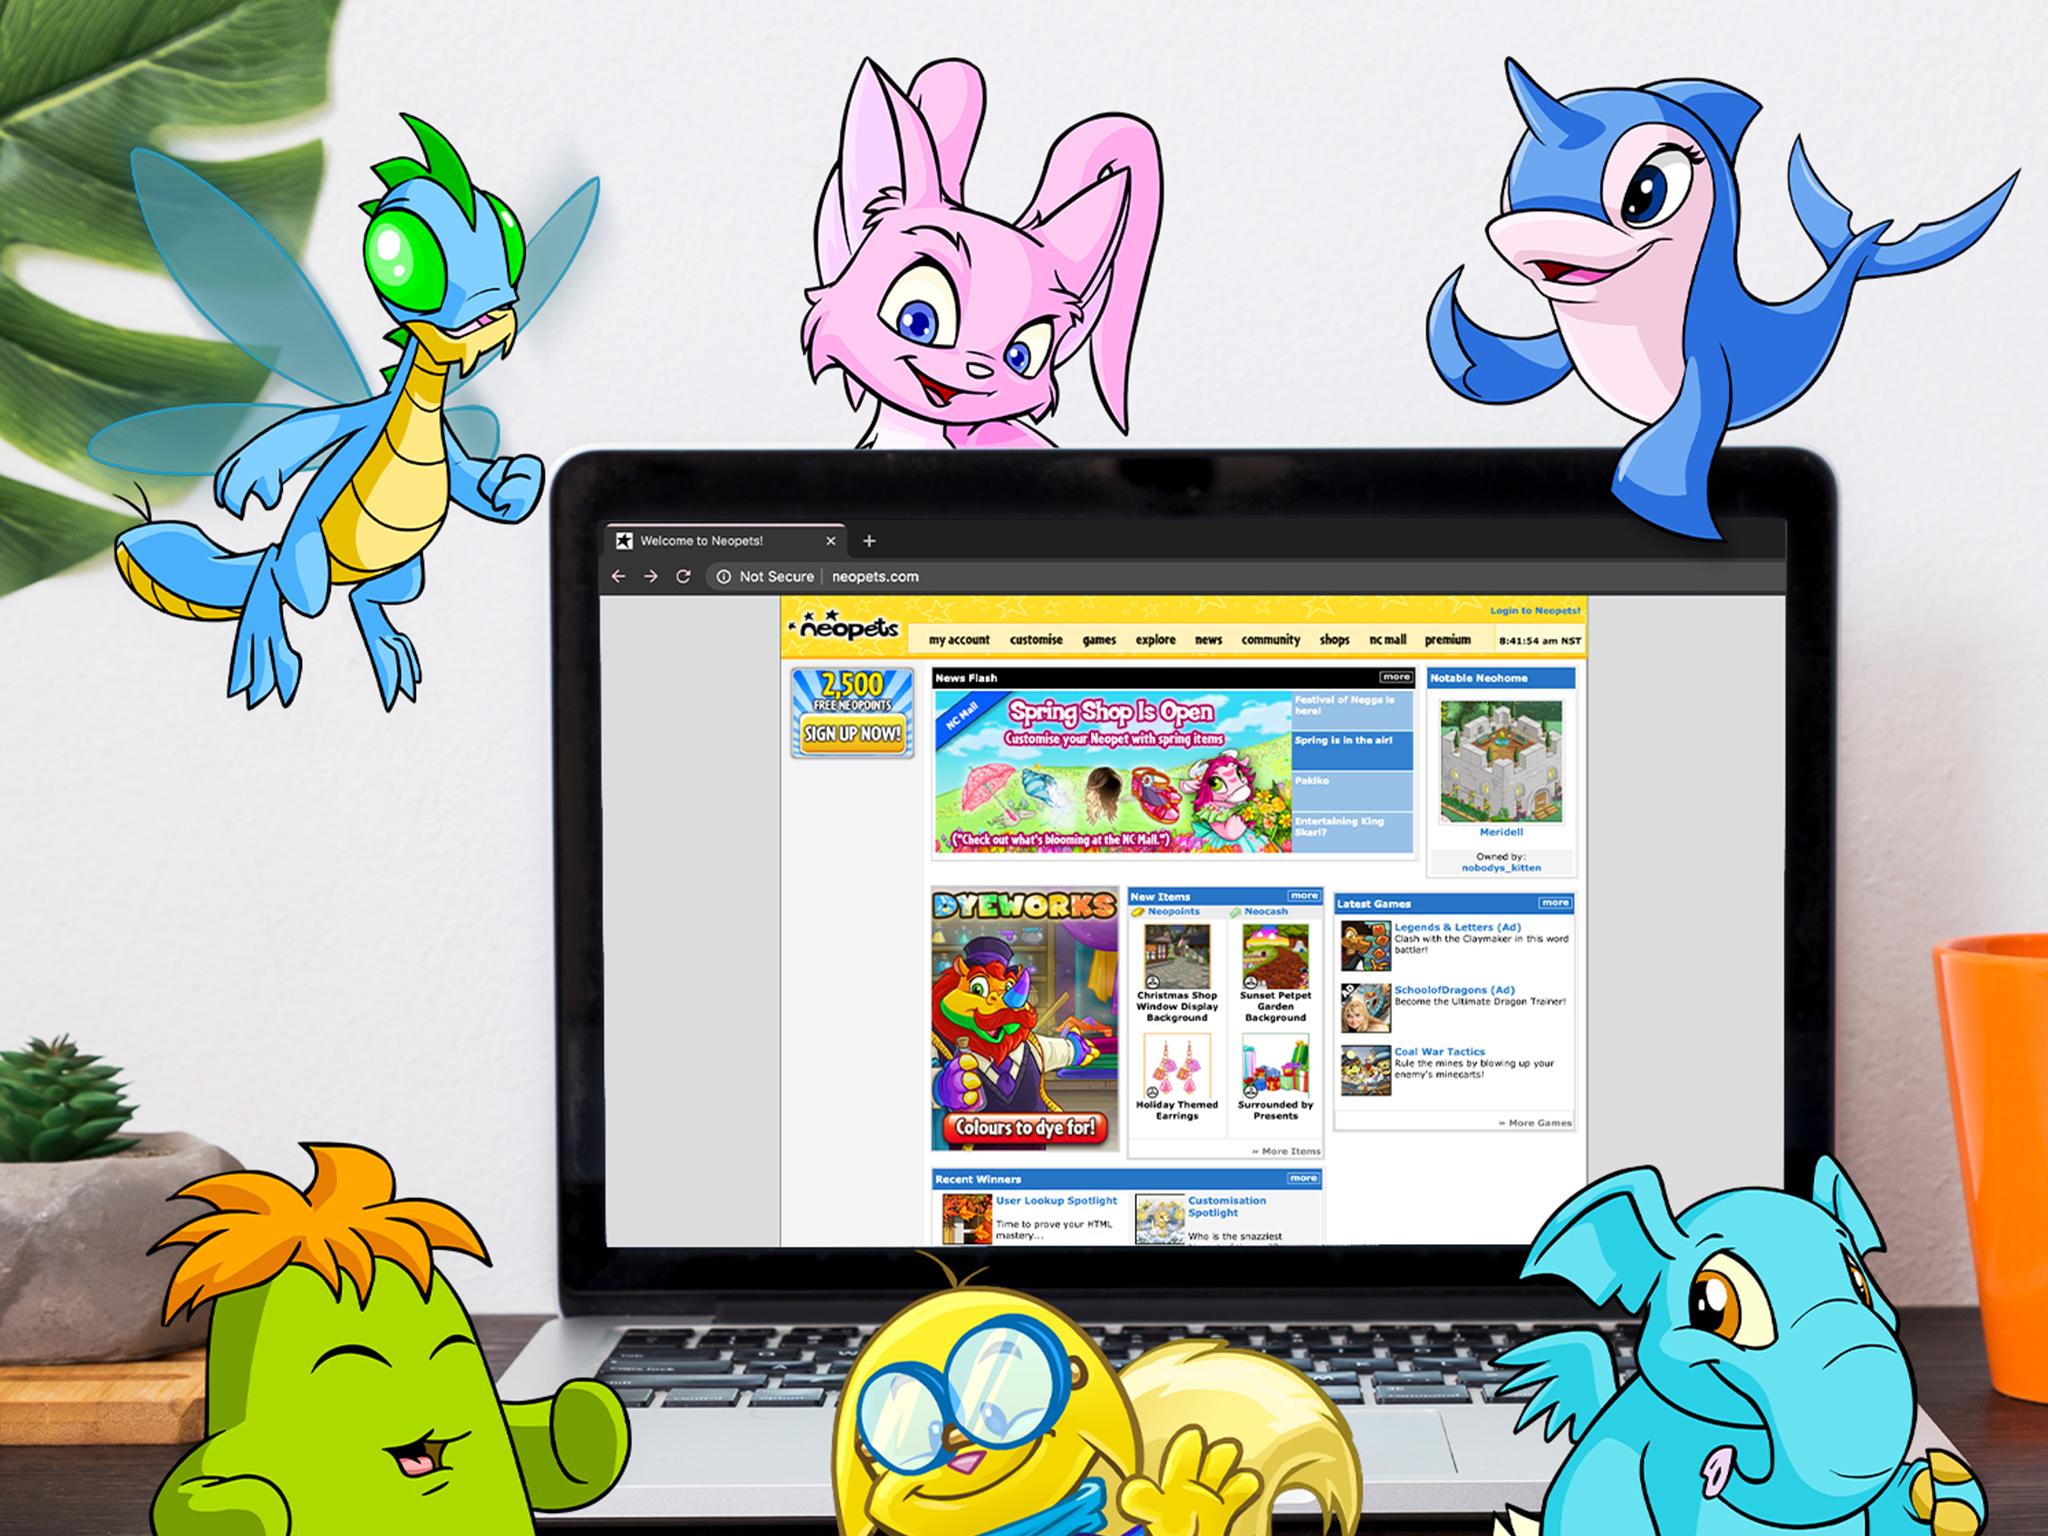 Virtual pet game Neopets returns, but should it stay in the past?, Games